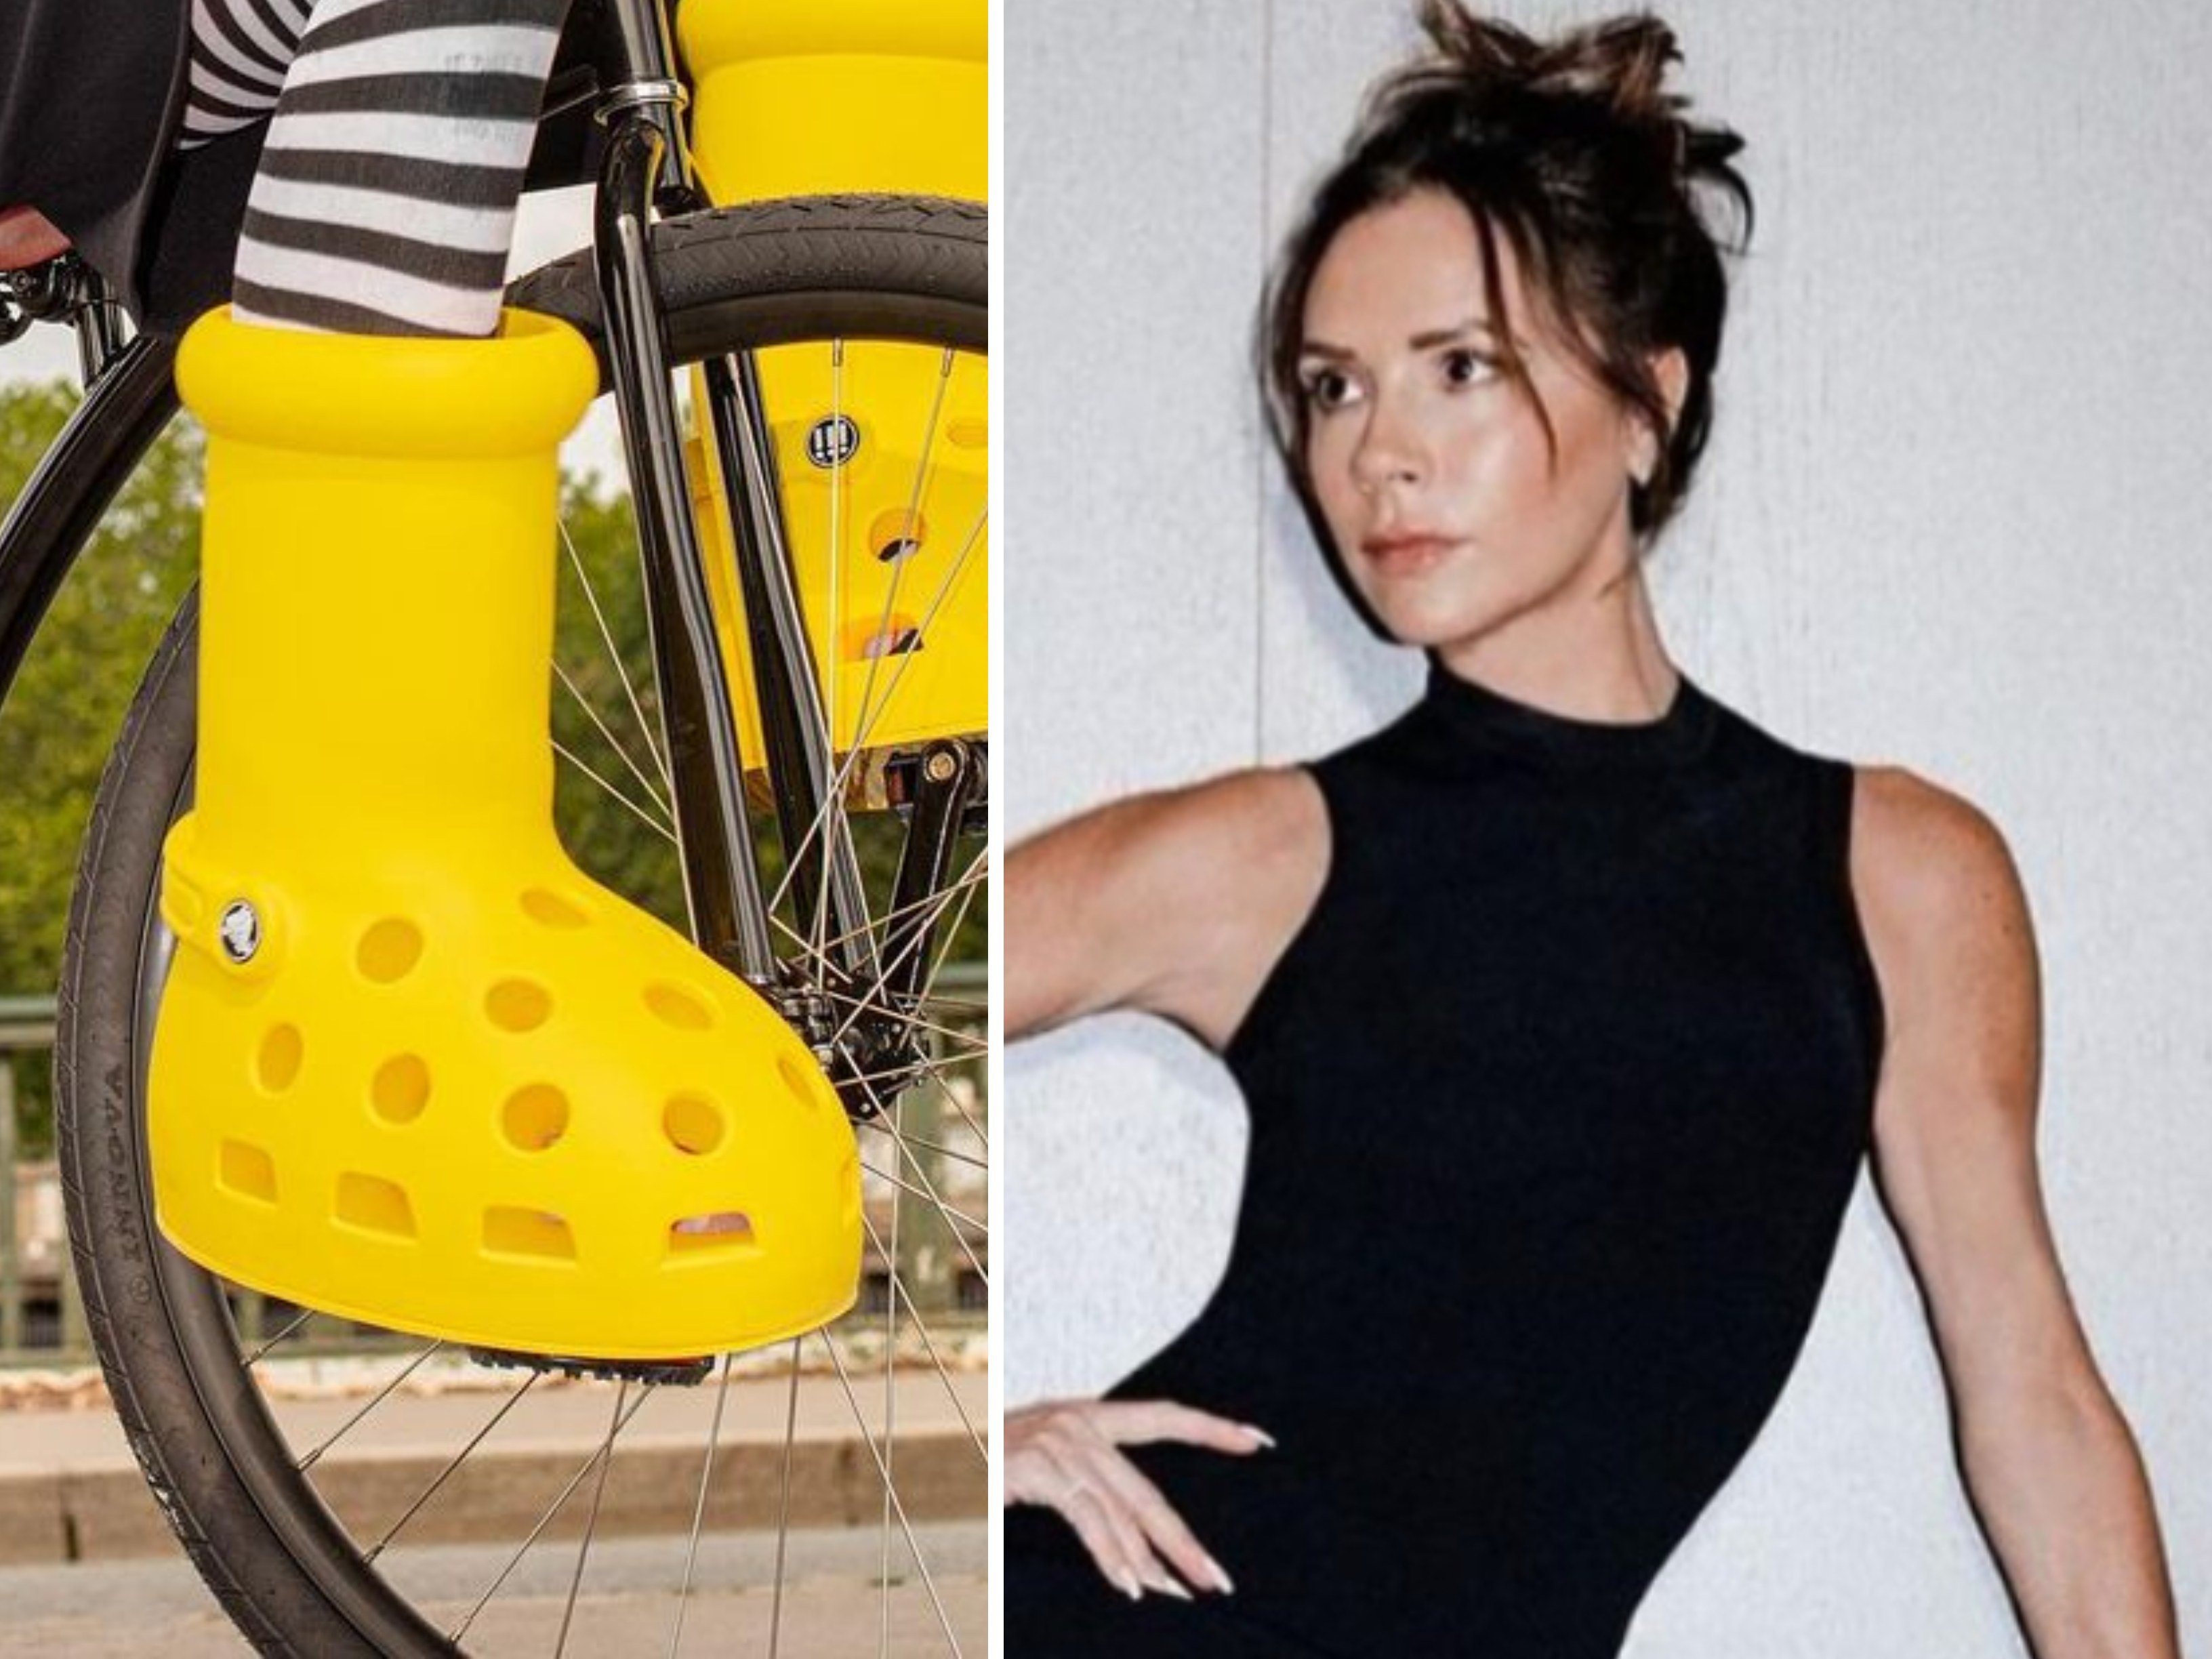 Victoria Beckham once said she “can’t concentrate in flats” but has since changed her tune, even posing in MSCHF’s new giant yellow Crocs on TikTok recently. Photos:  @MSCHF, @victoriabeckham/Instagram